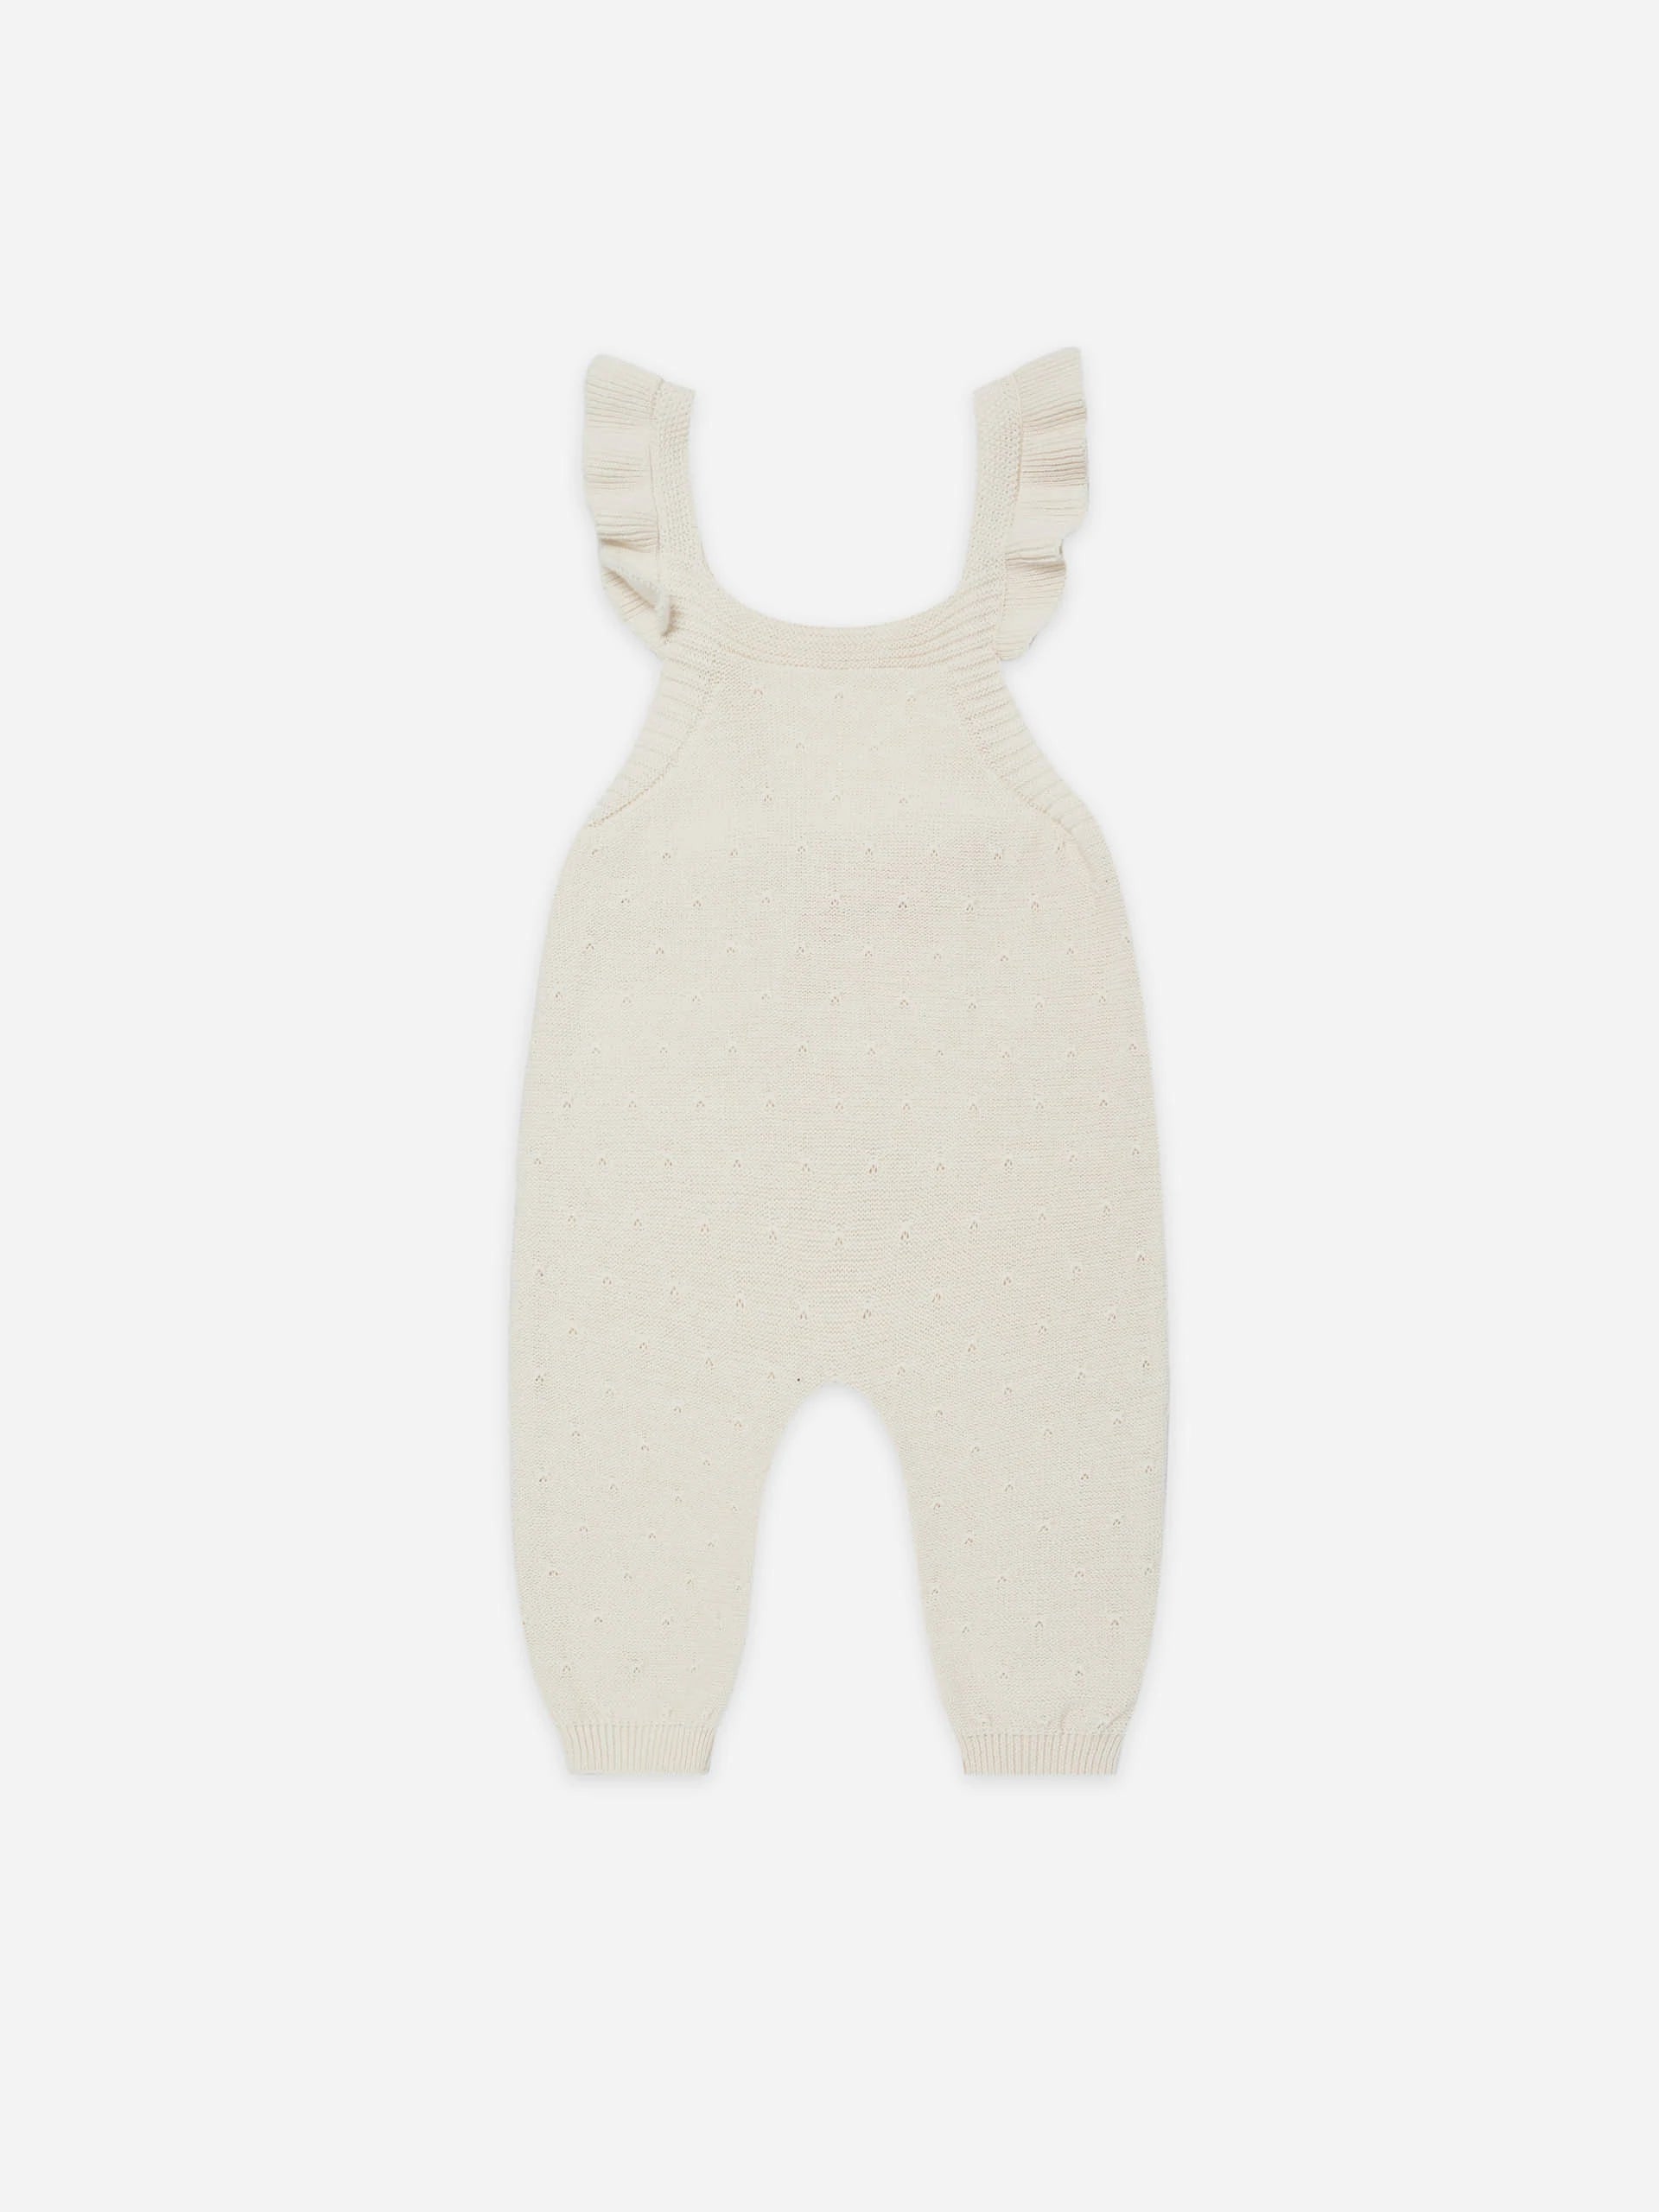 Knit Overall- Ivory